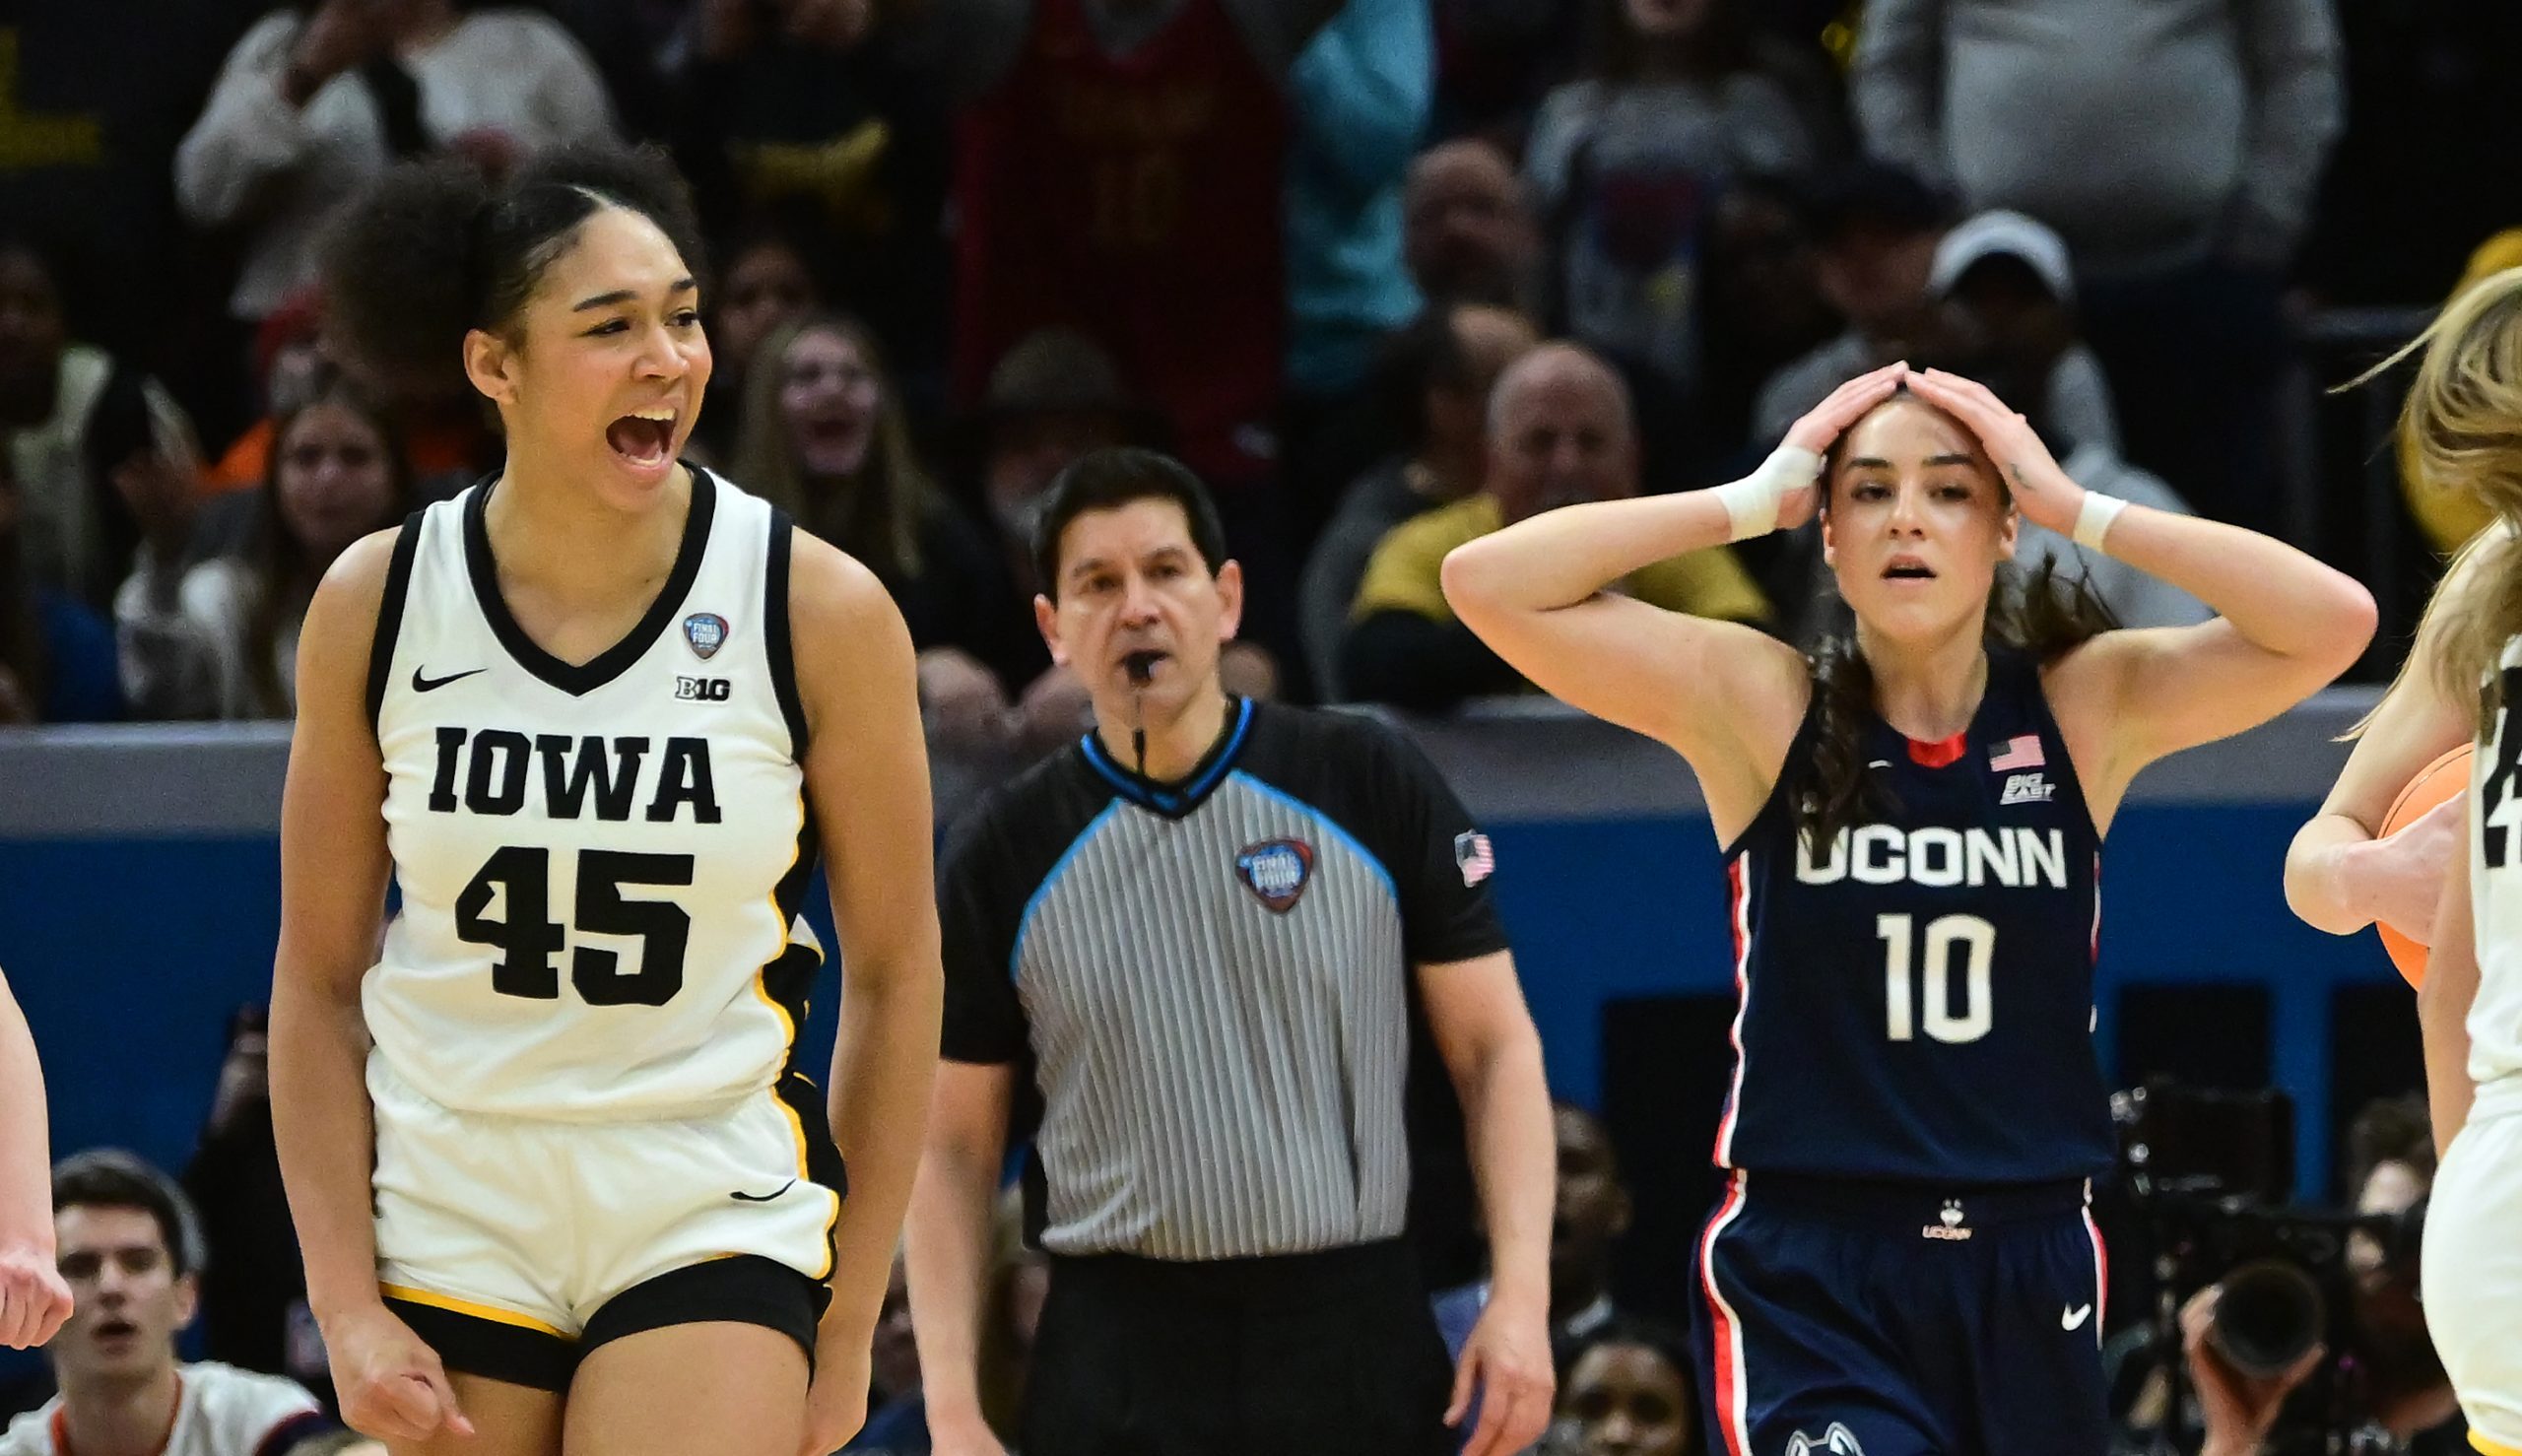 A foul in the final seconds of Iowa's Final Four win over UConn in the Women's NCAA Tournament sparked intense debate. Photo Credit: Ken Blaze-USA TODAY Sports